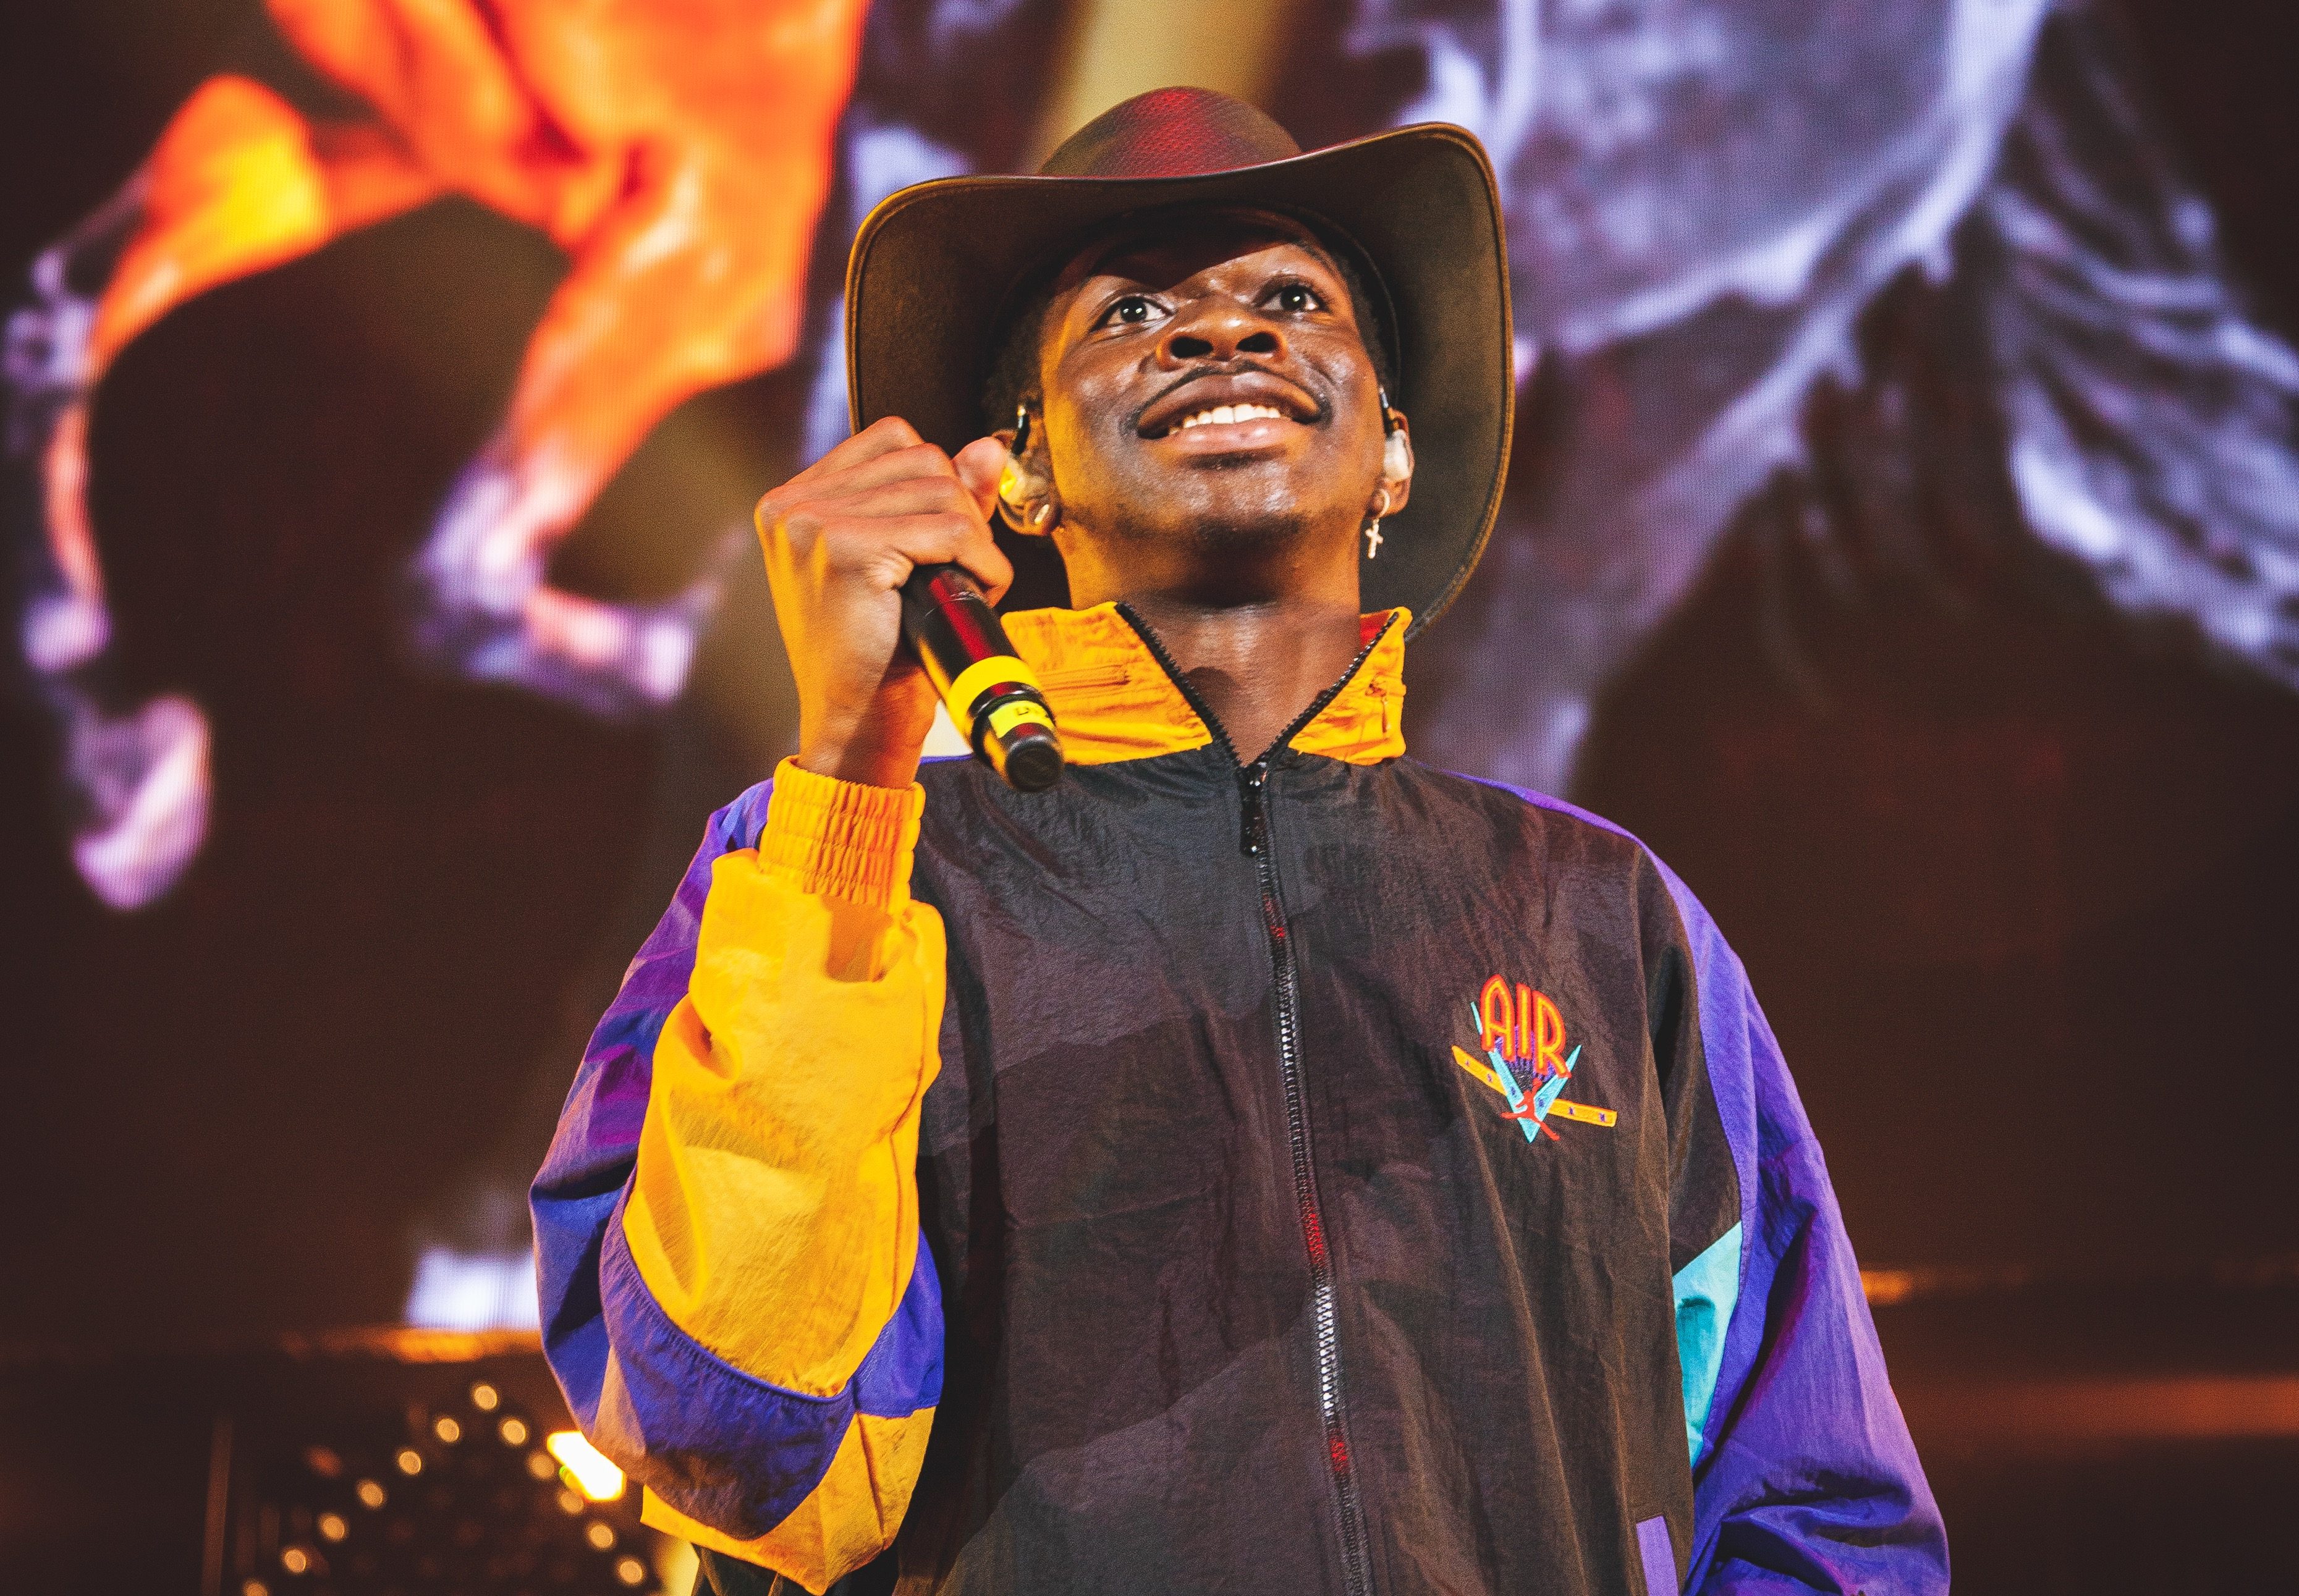 Lil Nas X Respond To Joyner Lucas & More Calling Him Out About "MONTERO"